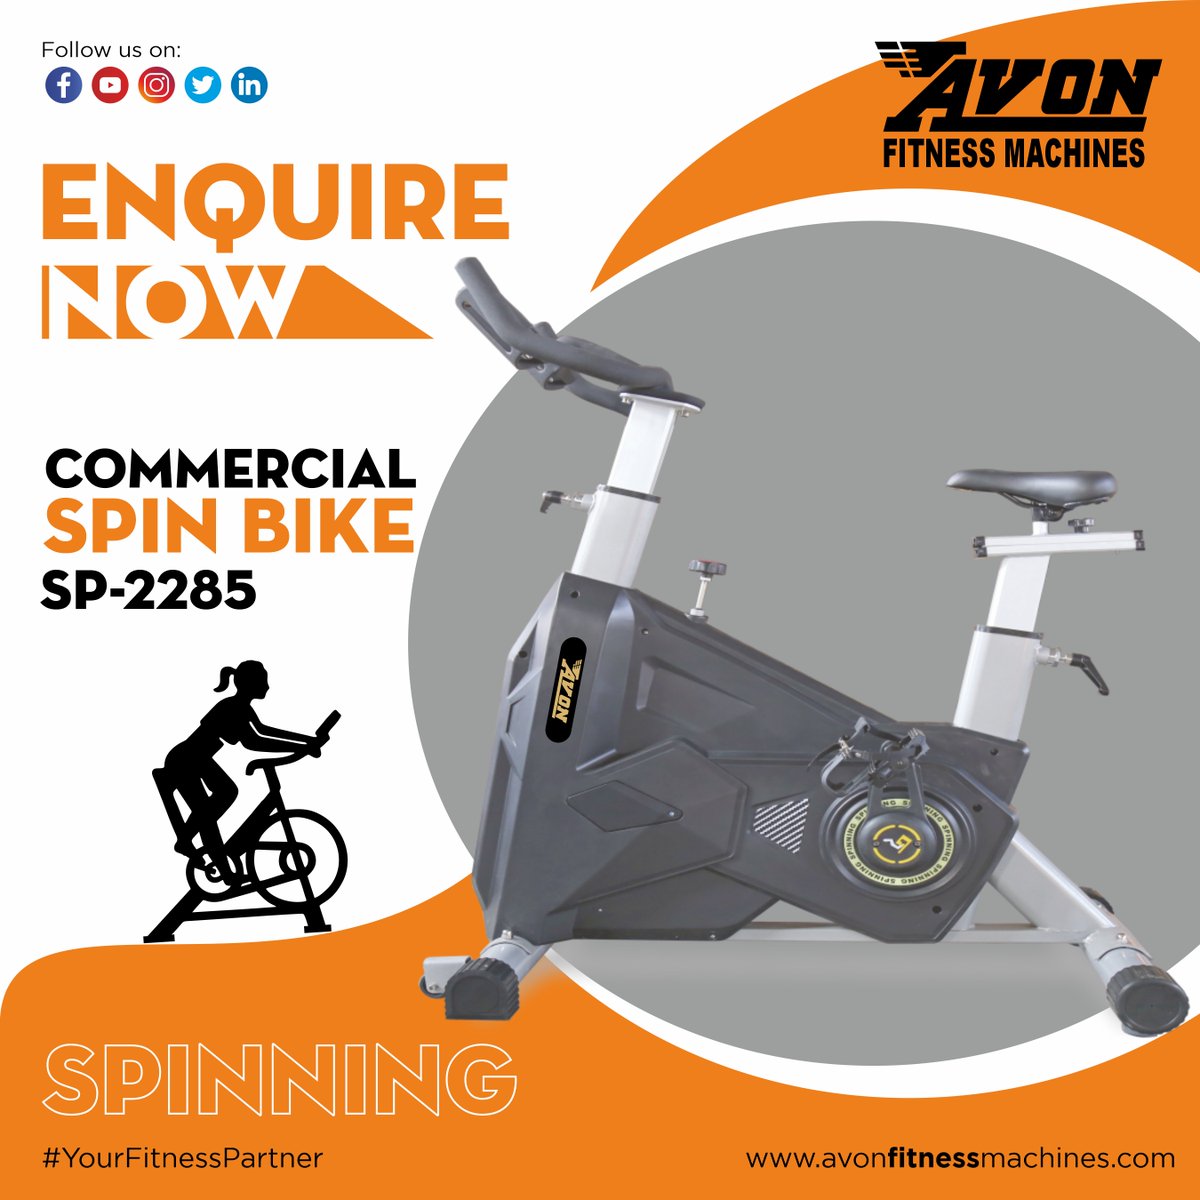 If yours a dream to redefine your health, make it happen with AVON Fitness Spin Bike.
.
#YourFitnesssPartner #Spinbike #spin #excercising #bestspinbikes #crosstrainerworkout #workoutmotivation #workoutspecialist #workoutroutine #fitnessinfluencer #fitnessismylife #fitbody